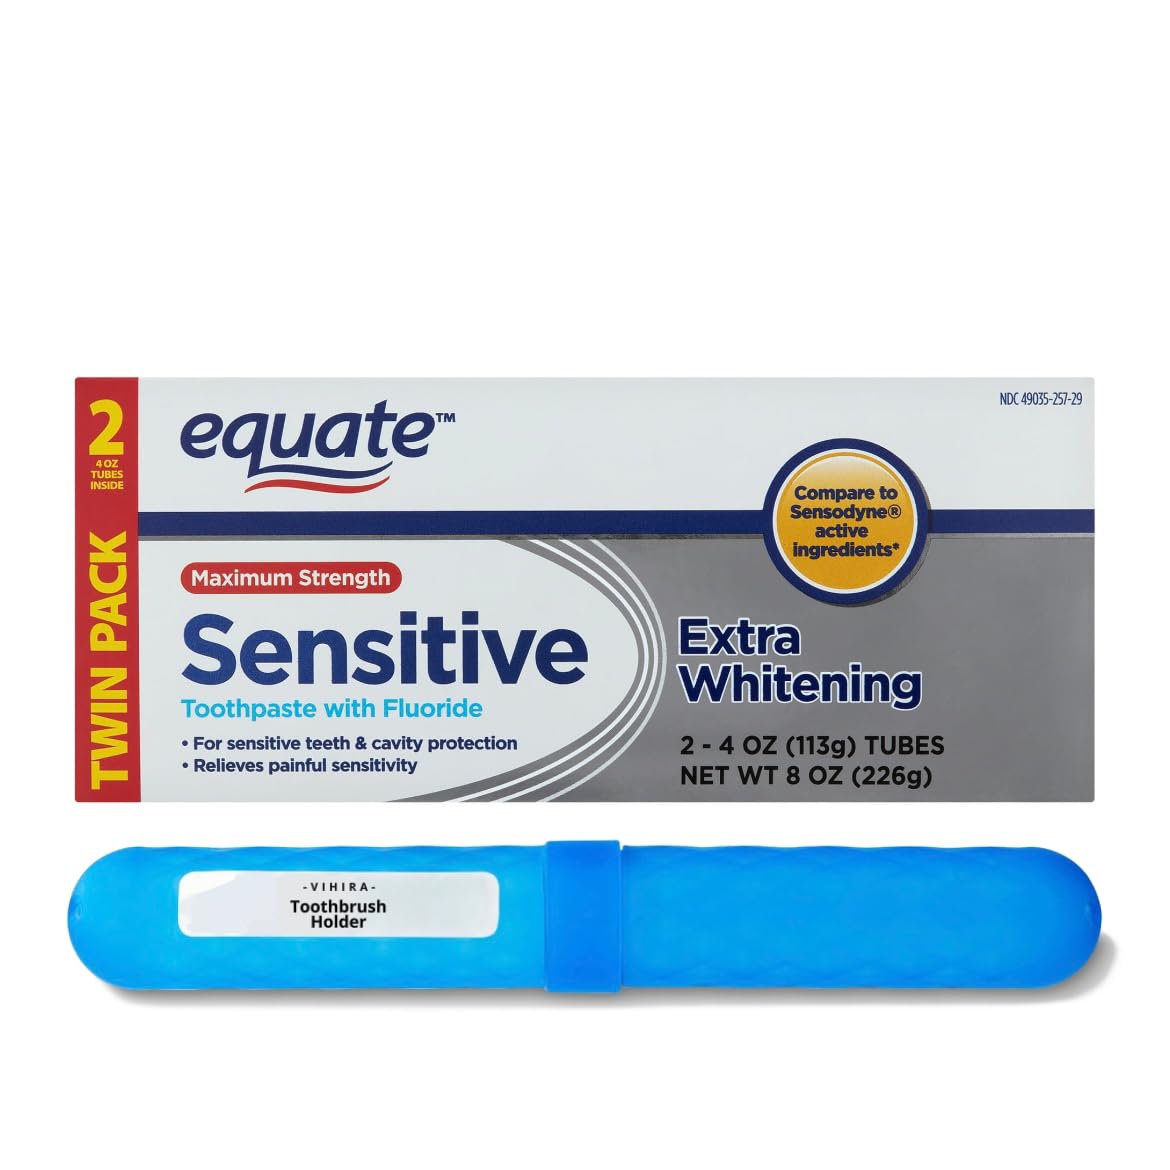 (2 Pack) Equate, Maximum Strength Sensitive Extra Whitening Toothpaste with Fluoride, 4 oz + 1 Toothbrush Holder (Vary by Color) Included by Vihira